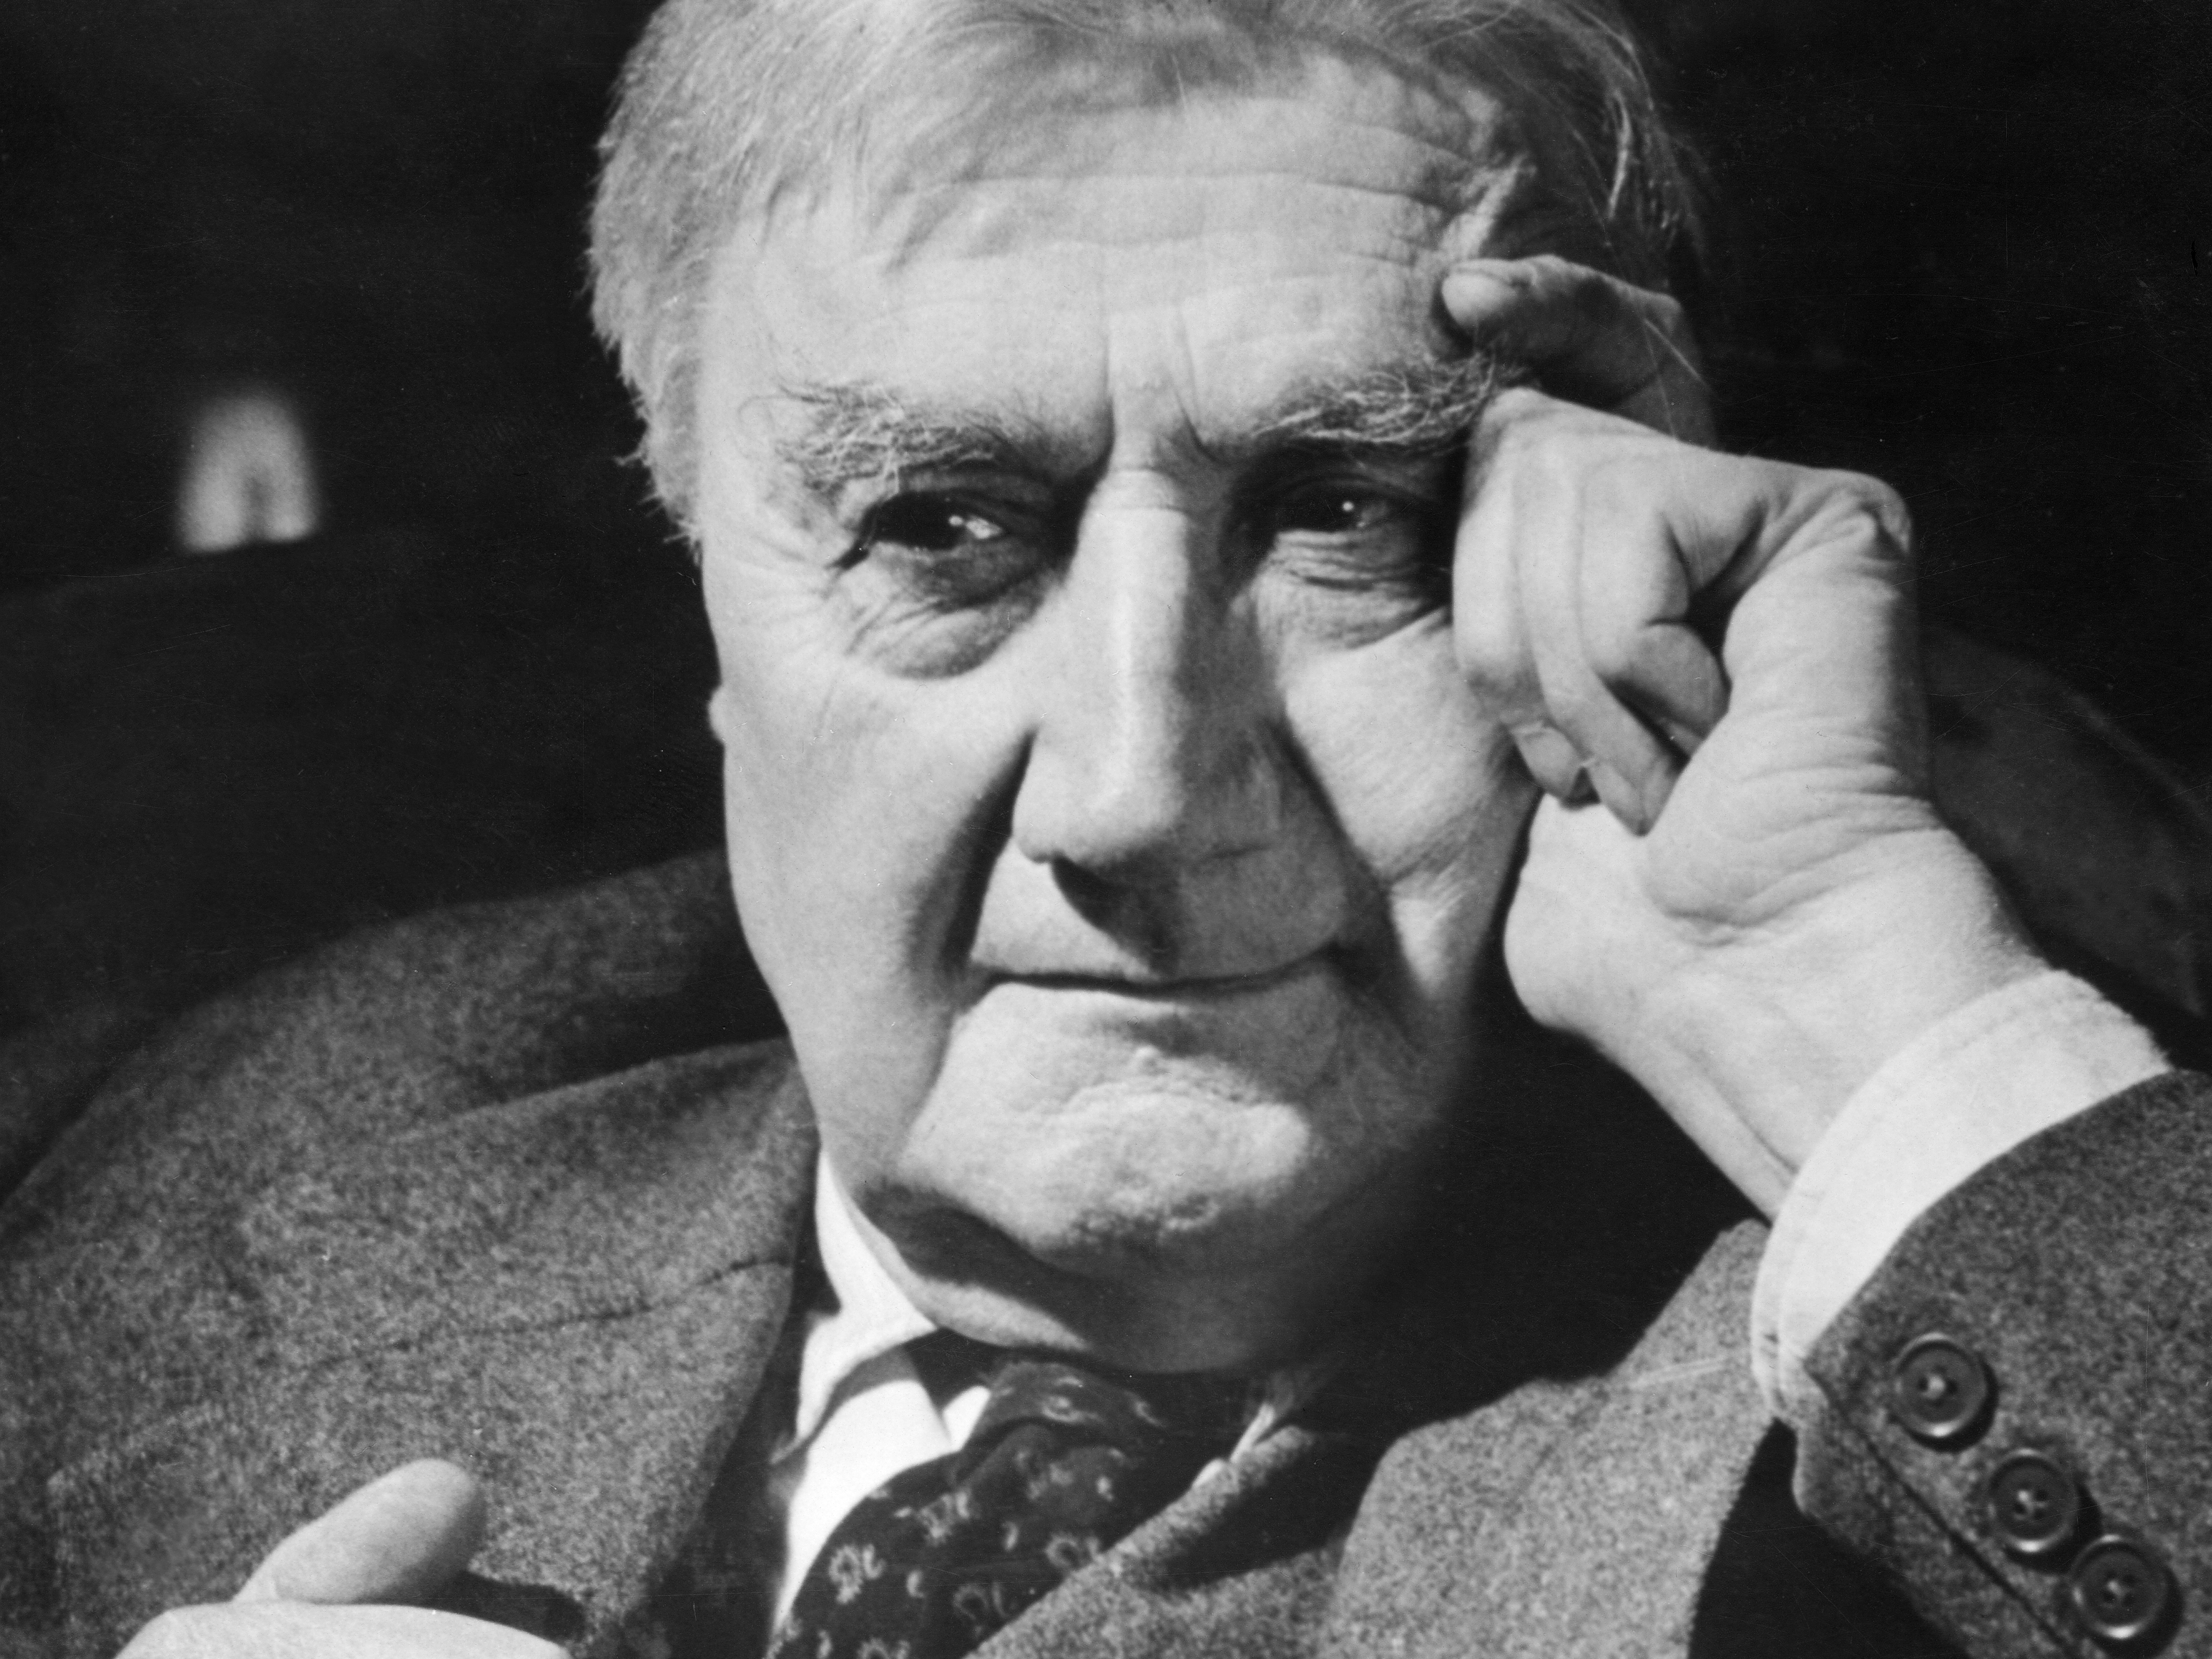 Ralph Vaughan Williams wrote pastoral music during profoundly turbulent times.